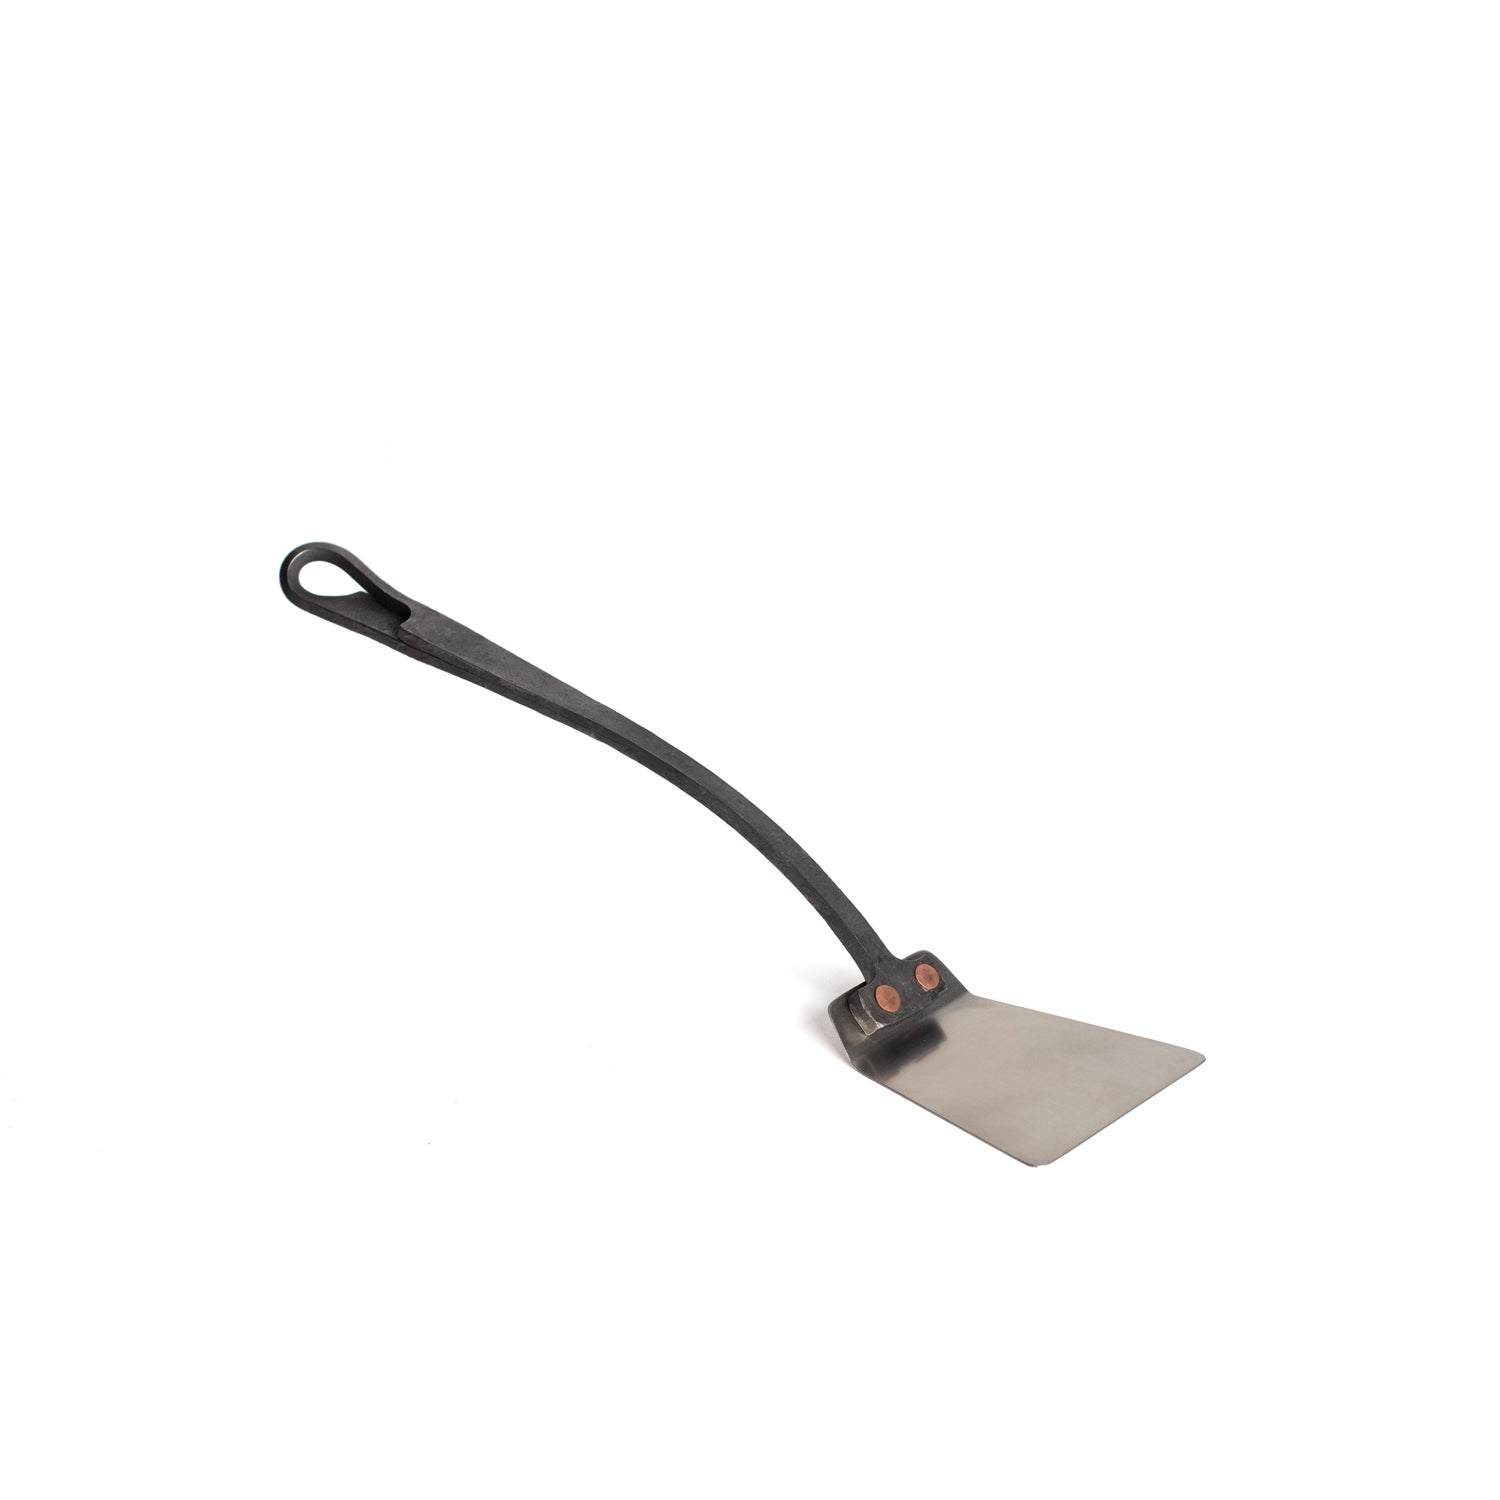 Phyre Forge Spatula